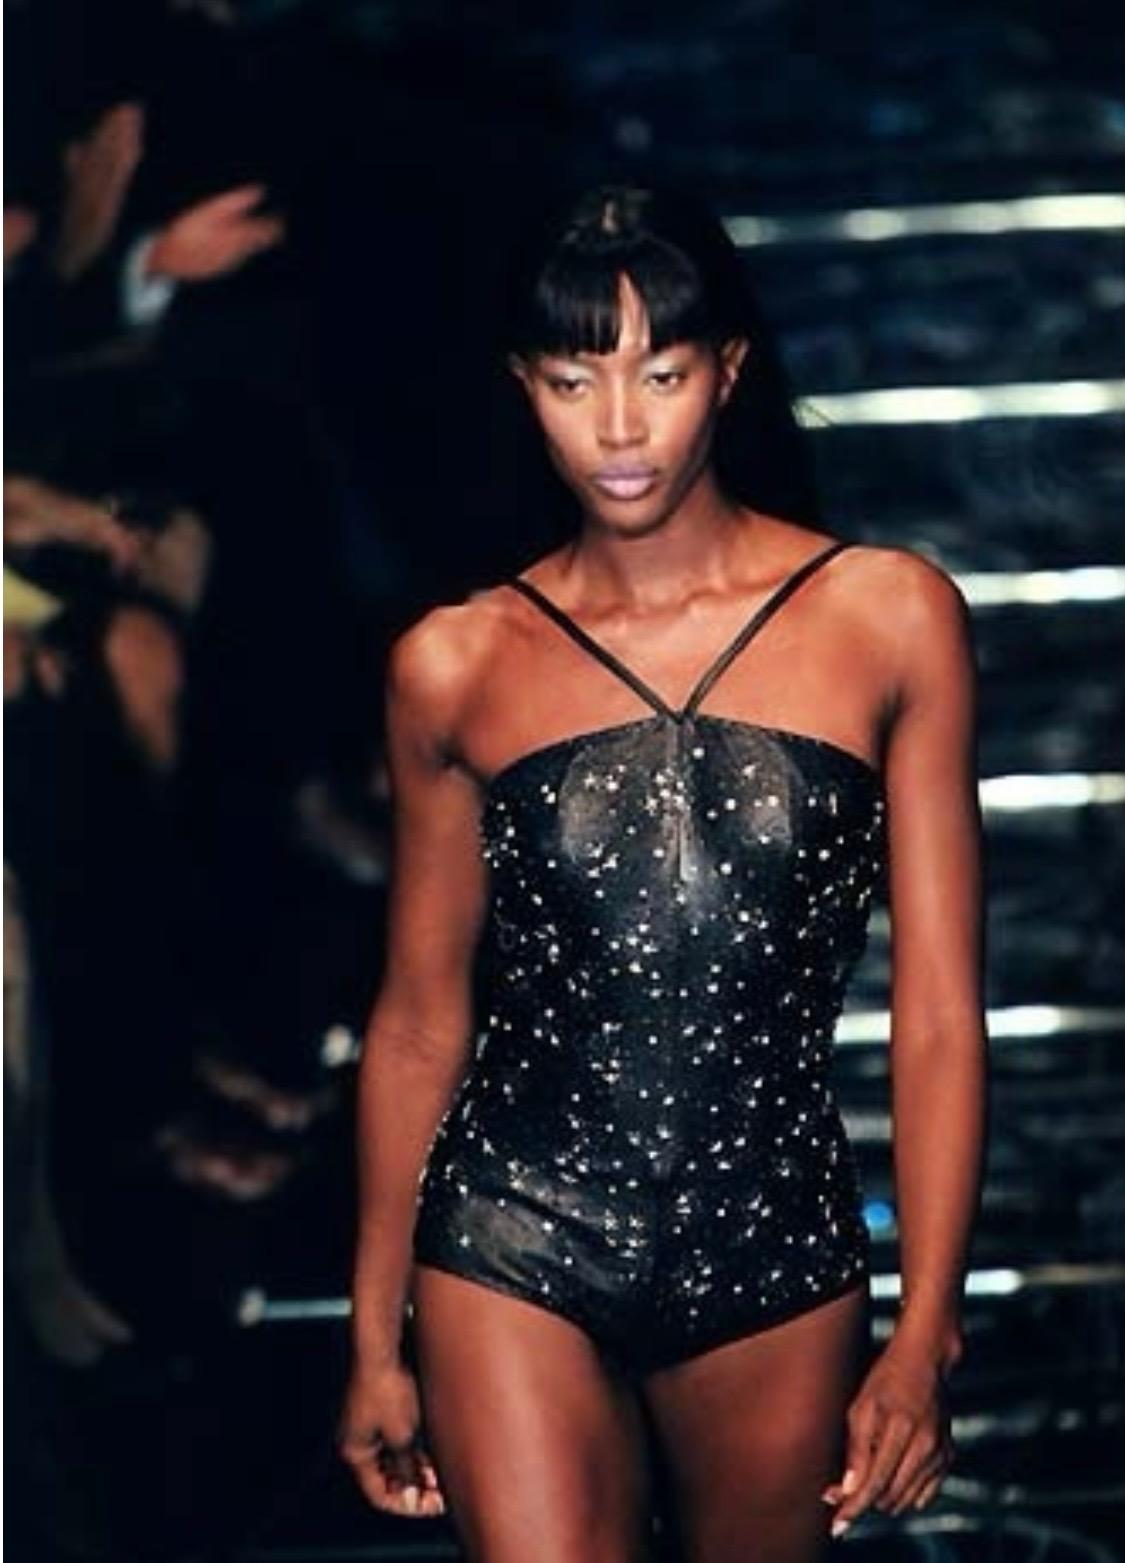 TheRealList presents: an absolutely amazing leather beaded Gianni Versace bodysuit, designed by Donatella Versace. From the Spring/Summer 1998 collection, this piece debuted on the season's runway on Naomi Campbell. This incredible one-piece was